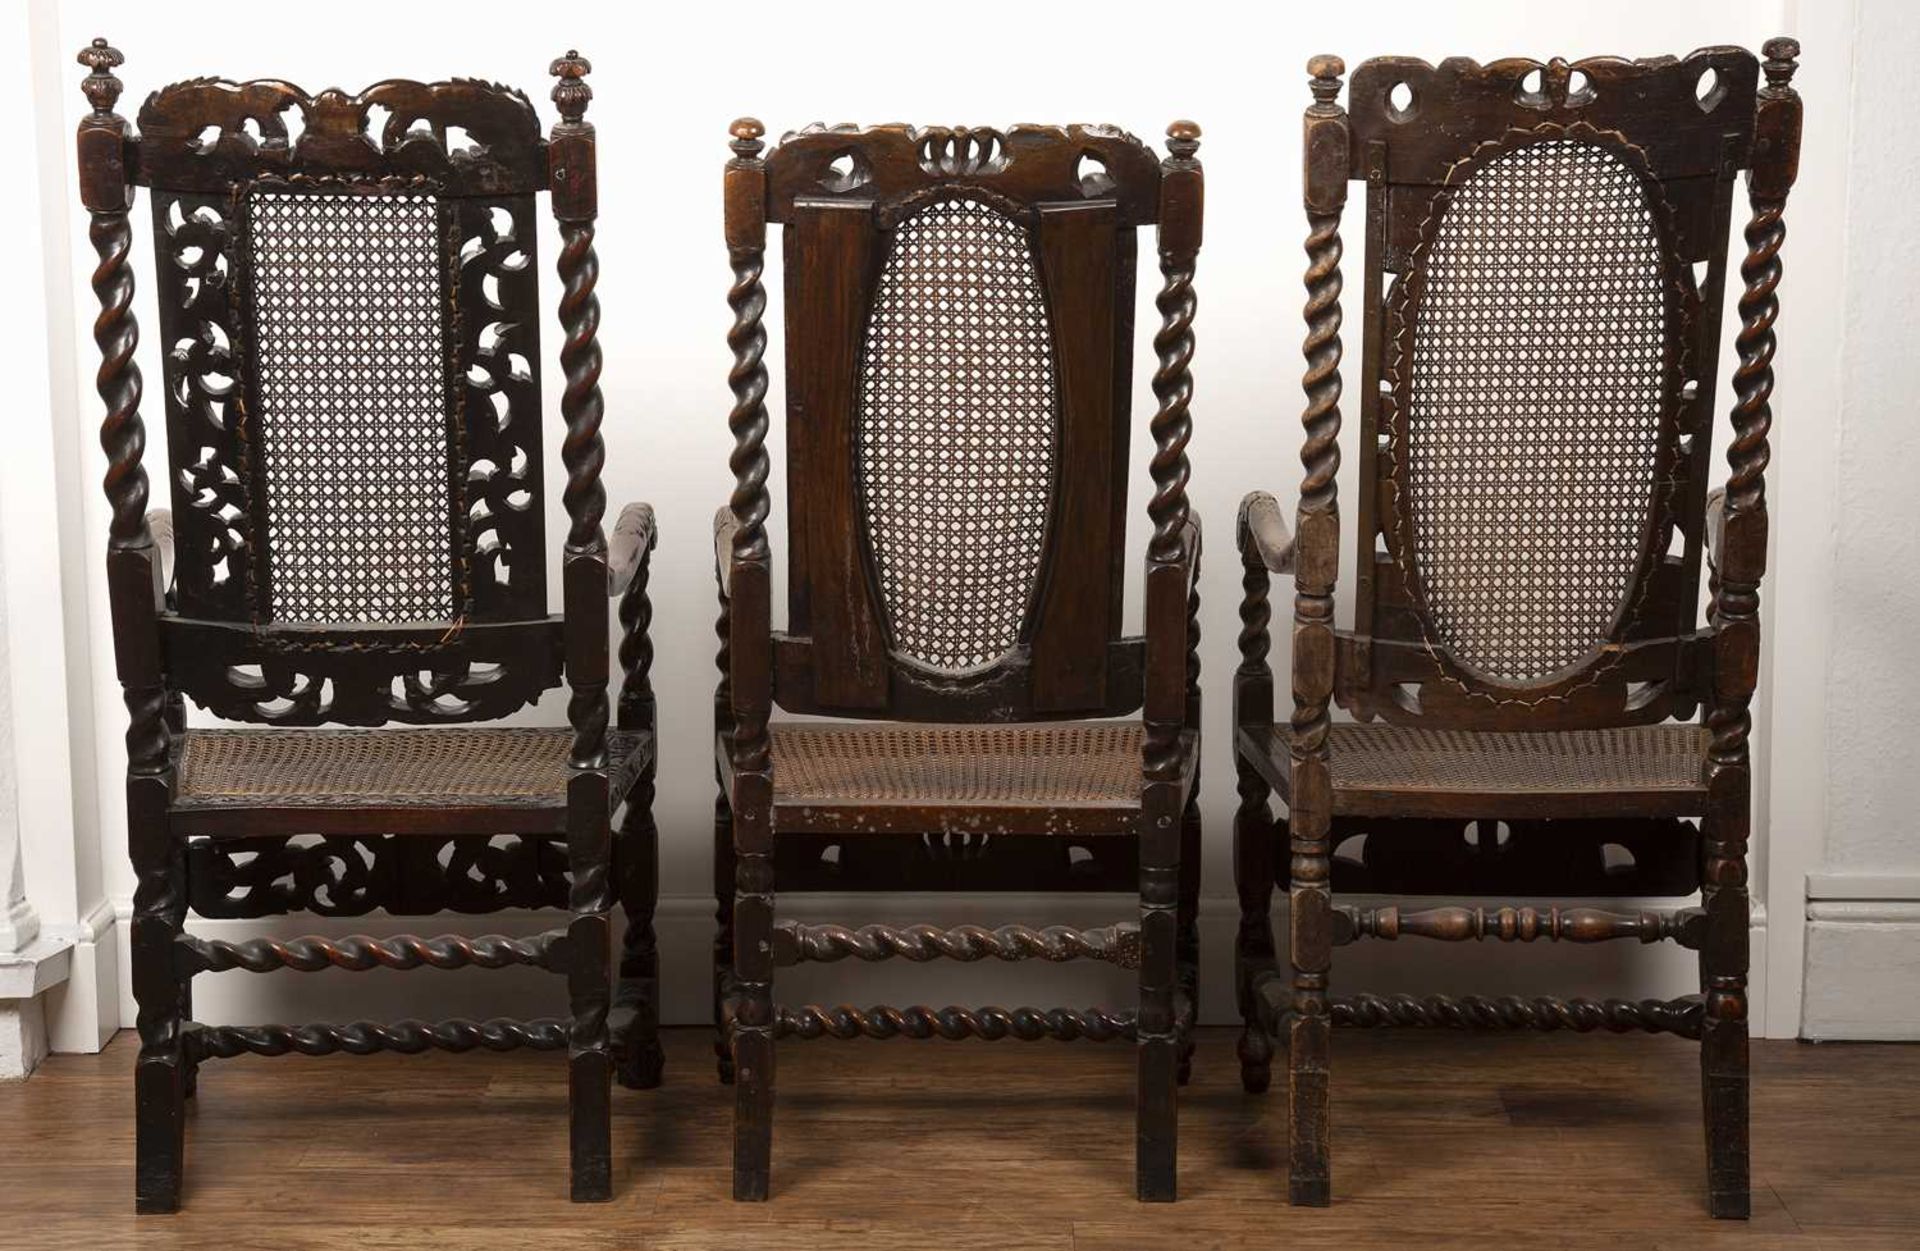 Three similar walnut armchairs Carolean and later, each with carved putti and coronet, and cane - Image 3 of 3